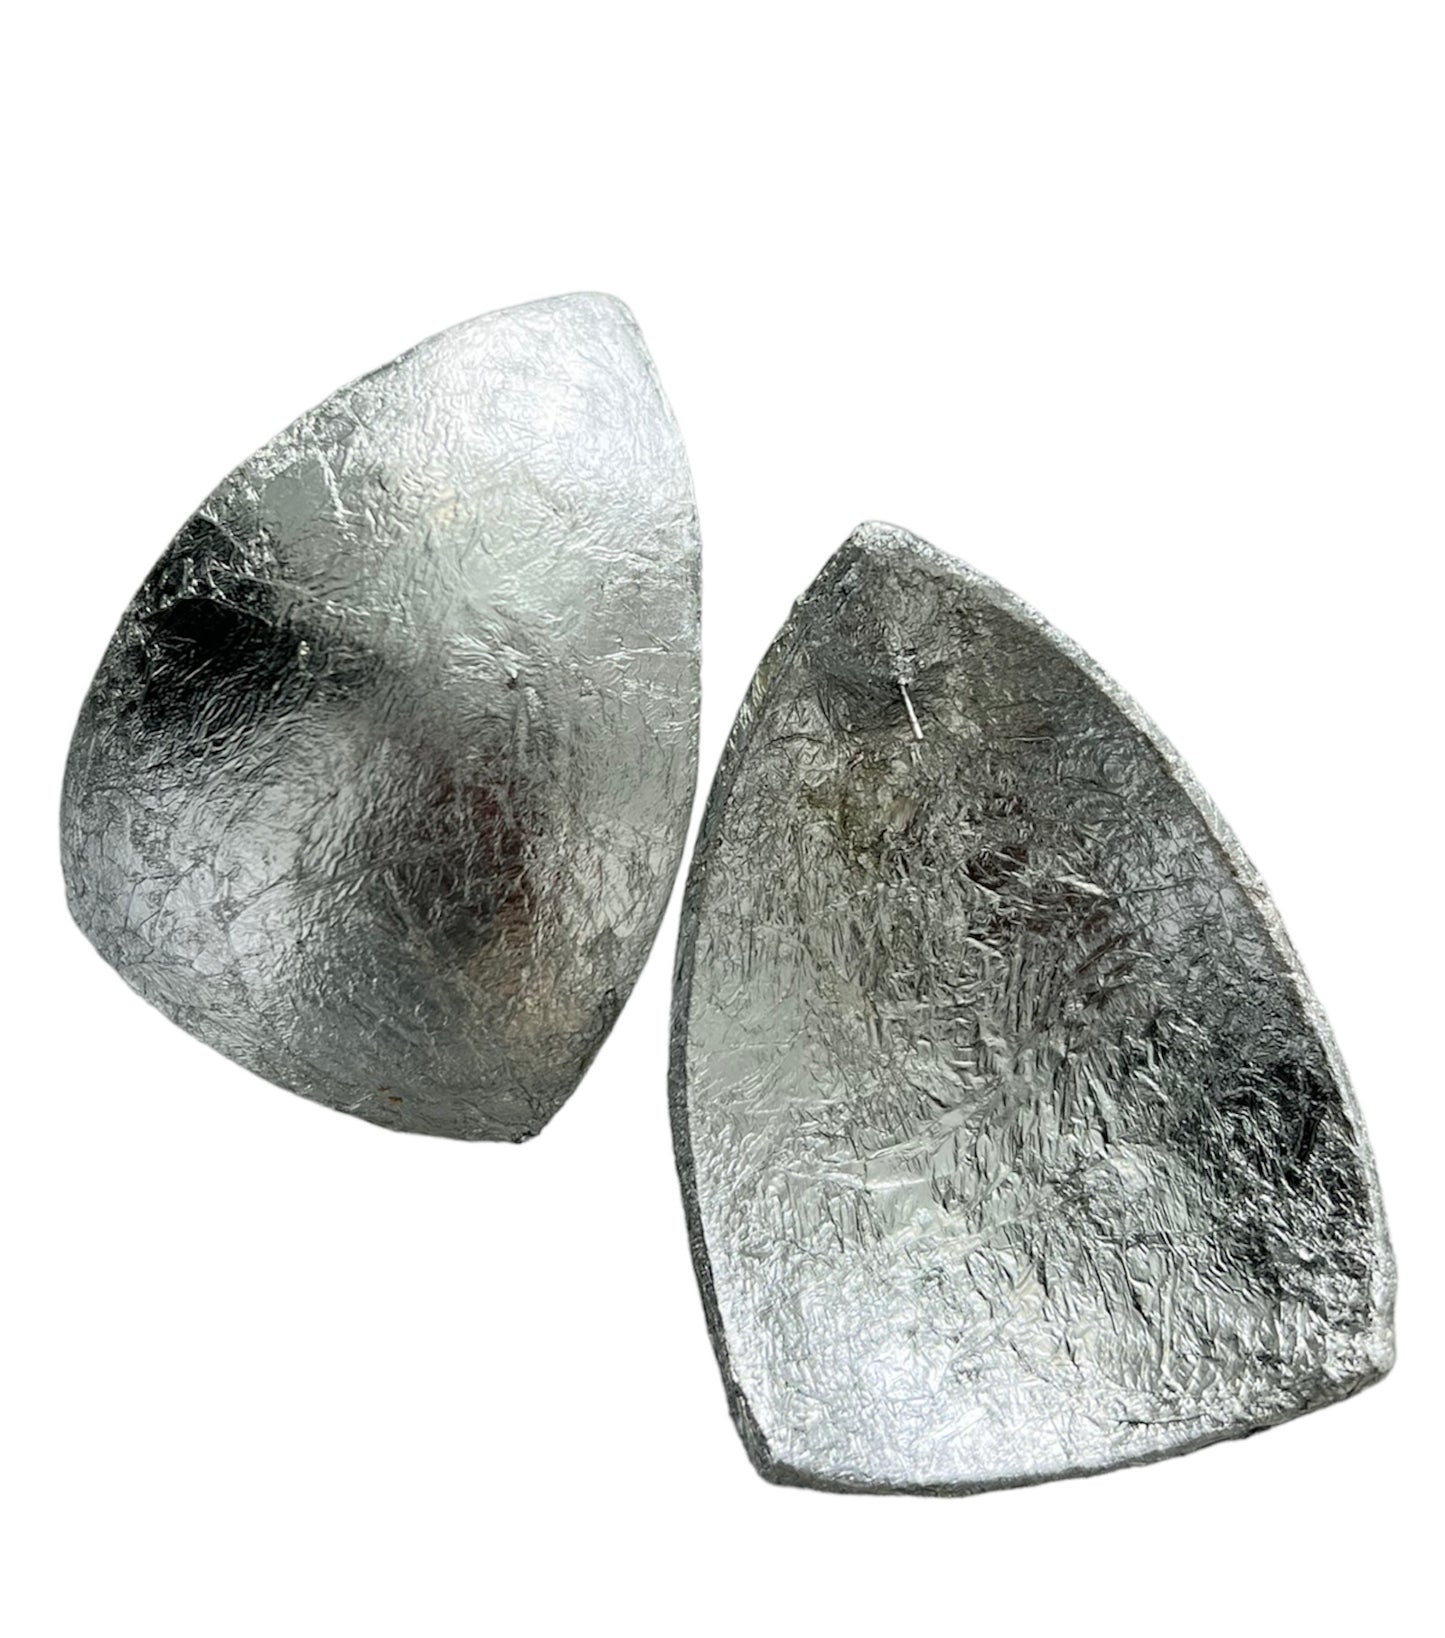 VINTAGE OVERSIZED STATEMENT EARRINGS- SILVER PYRAMID